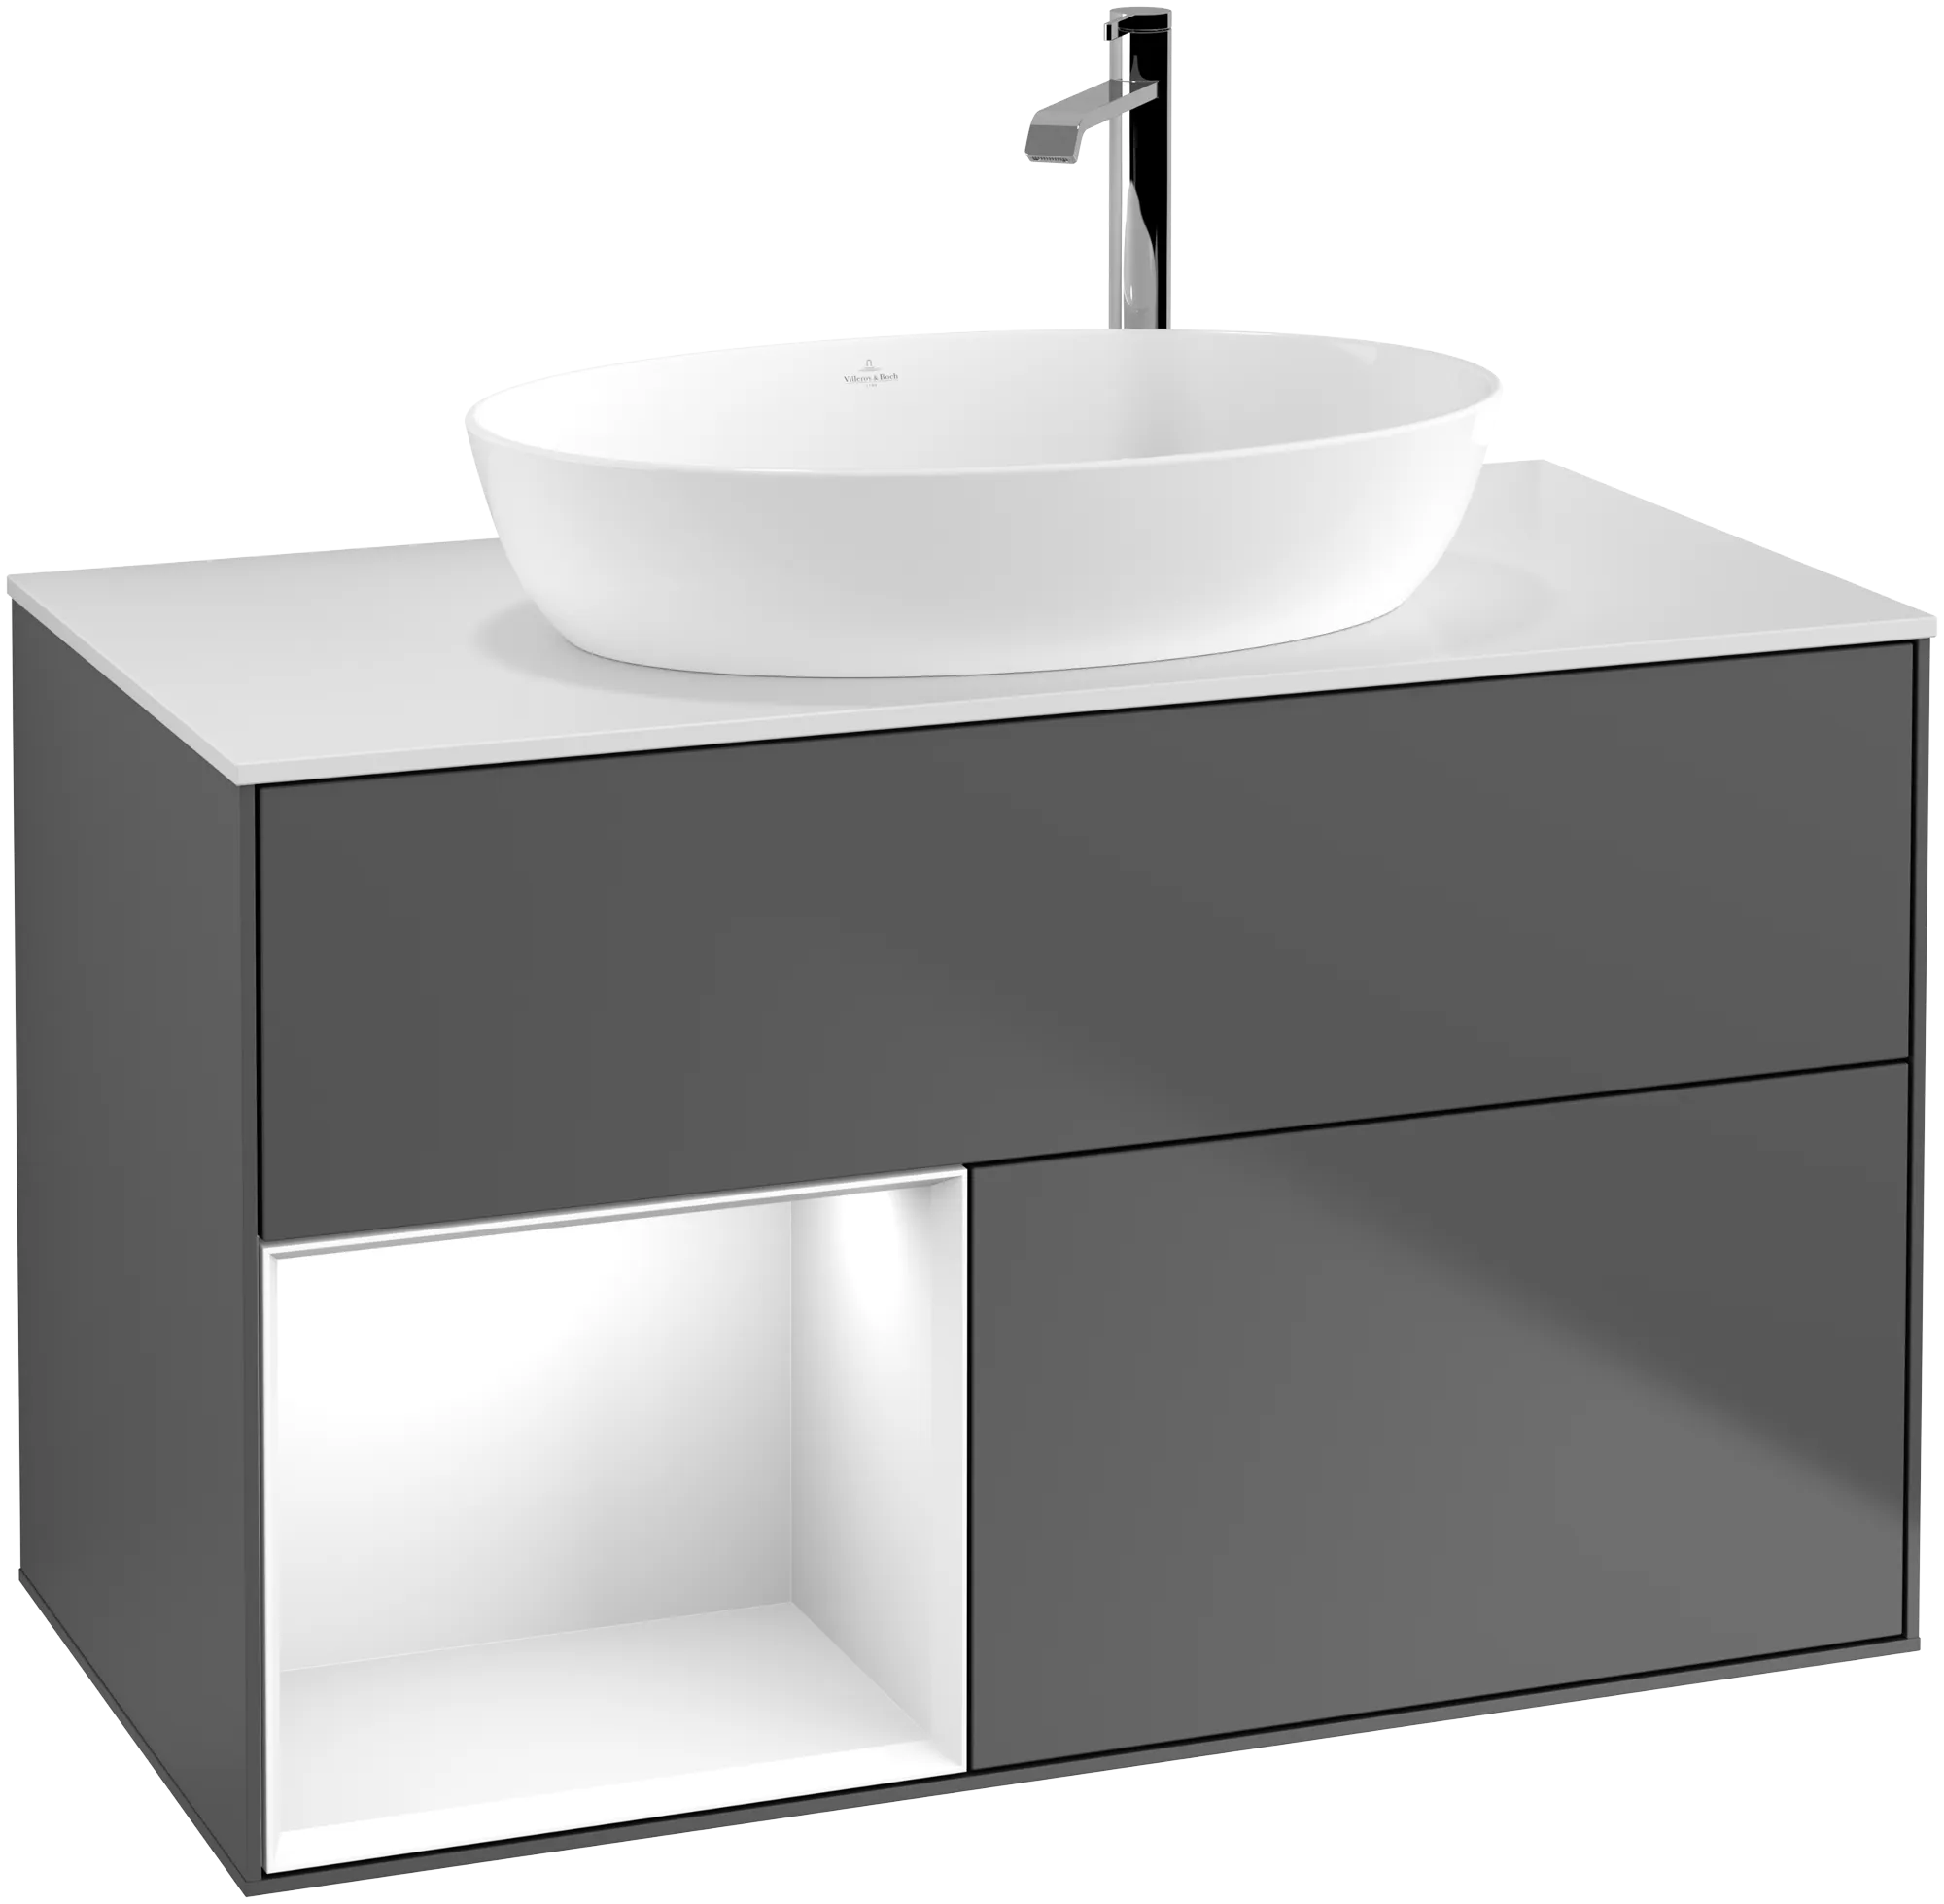 Obrázek VILLEROY BOCH Finion Vanity unit, with lighting, 2 pull-out compartments, 1000 x 603 x 501 mm, Anthracite Matt Lacquer / Glossy White Lacquer / Glass White Matt #G891GFGK